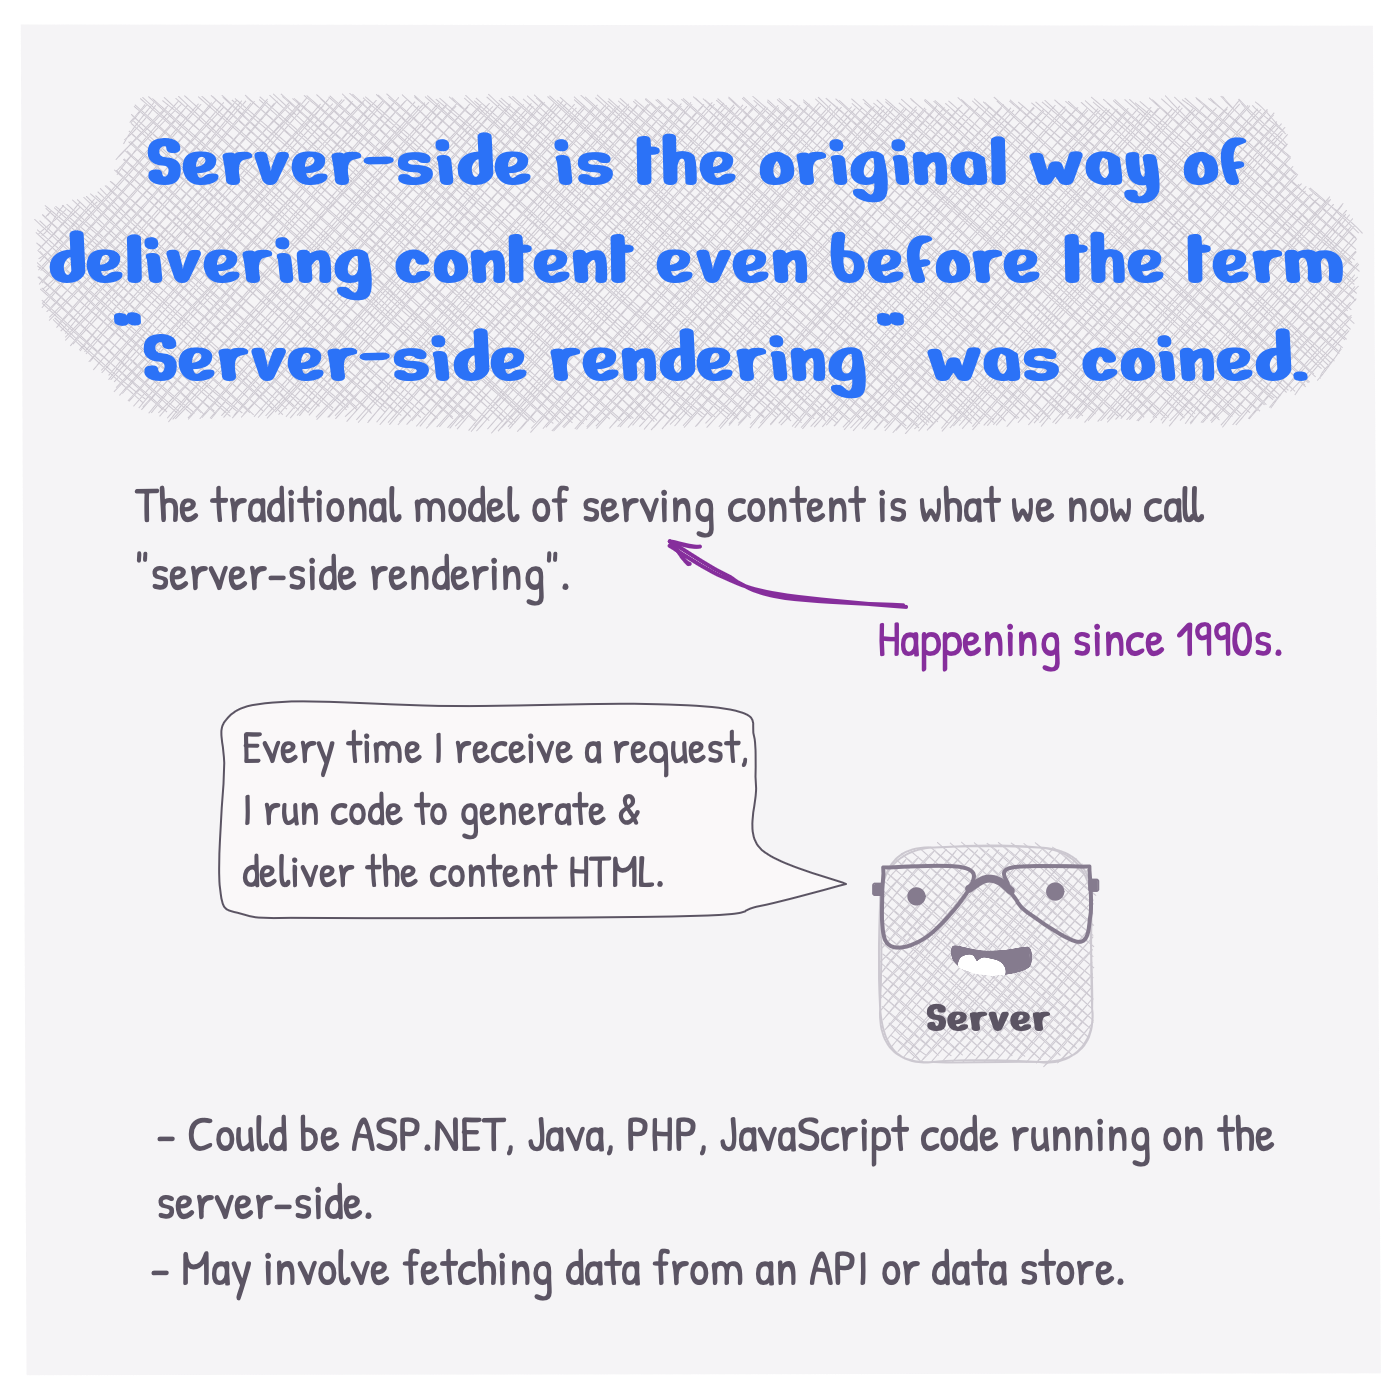 Server-side rendering is the traditional way of delivering content